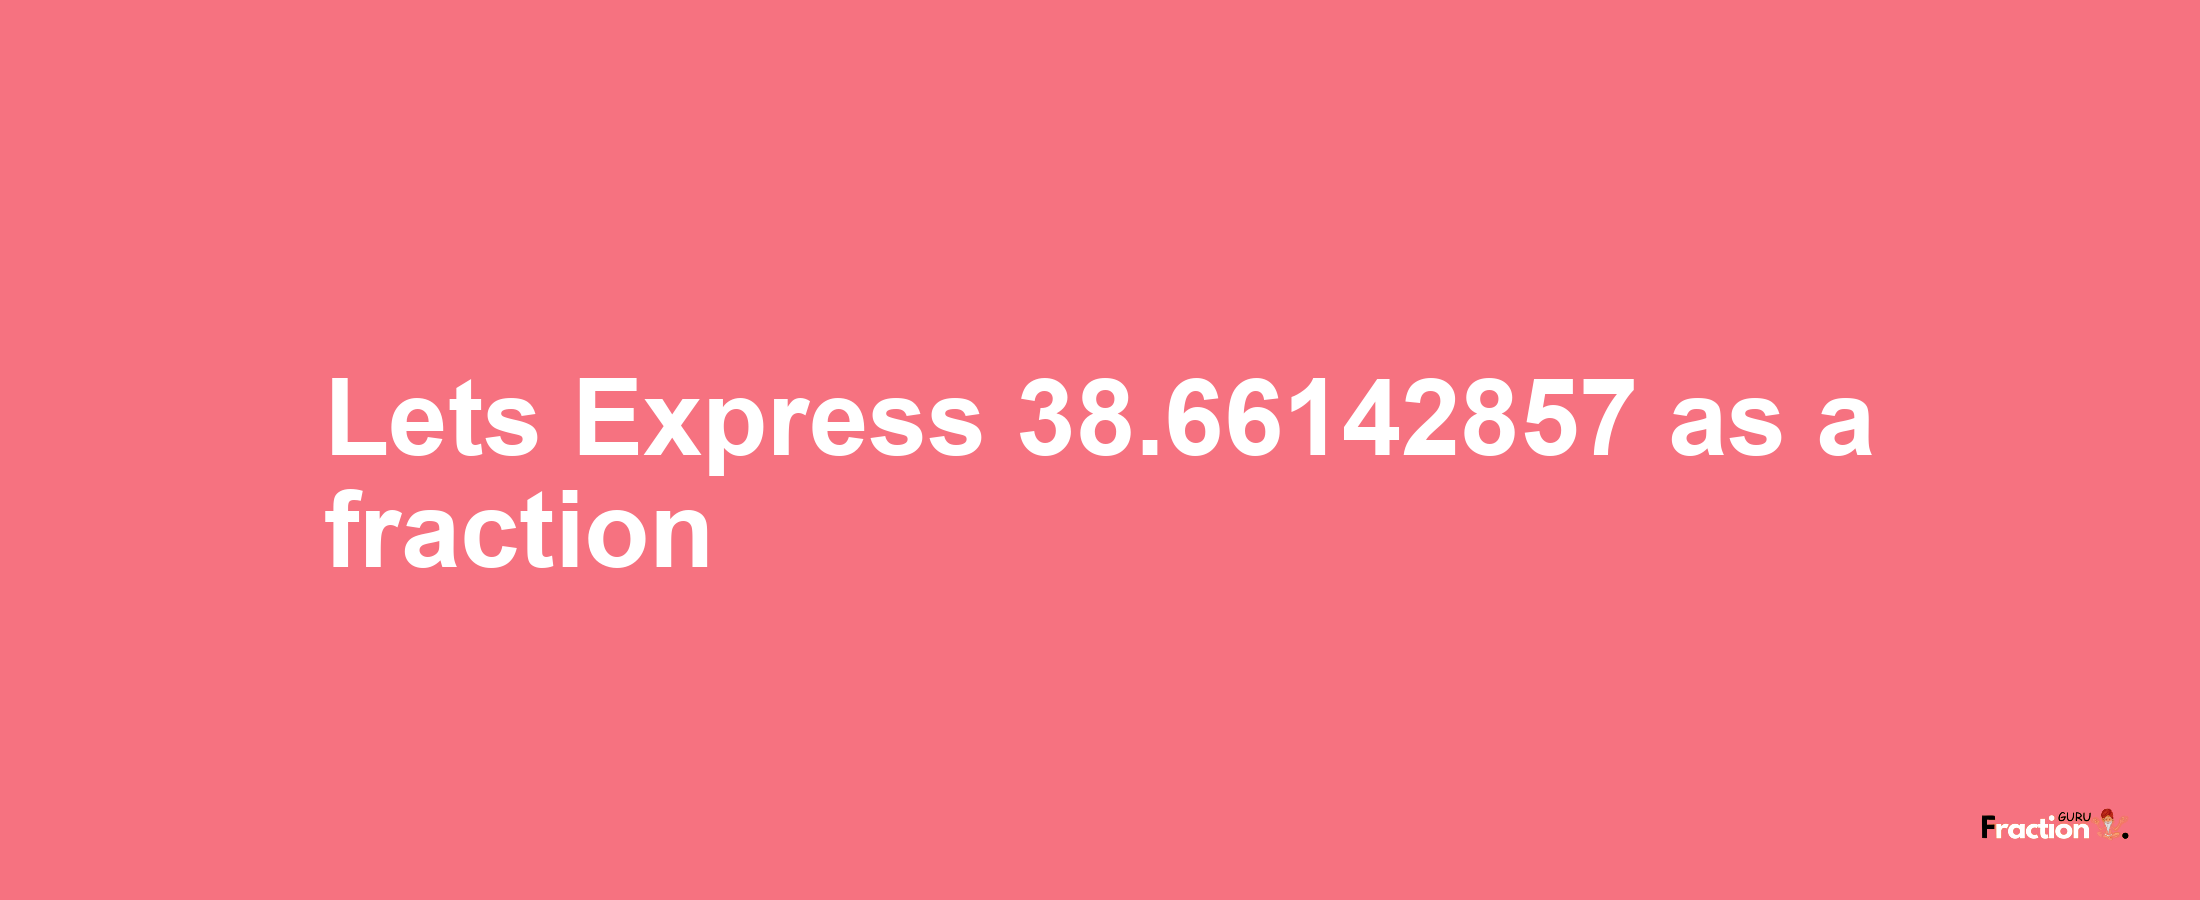 Lets Express 38.66142857 as afraction